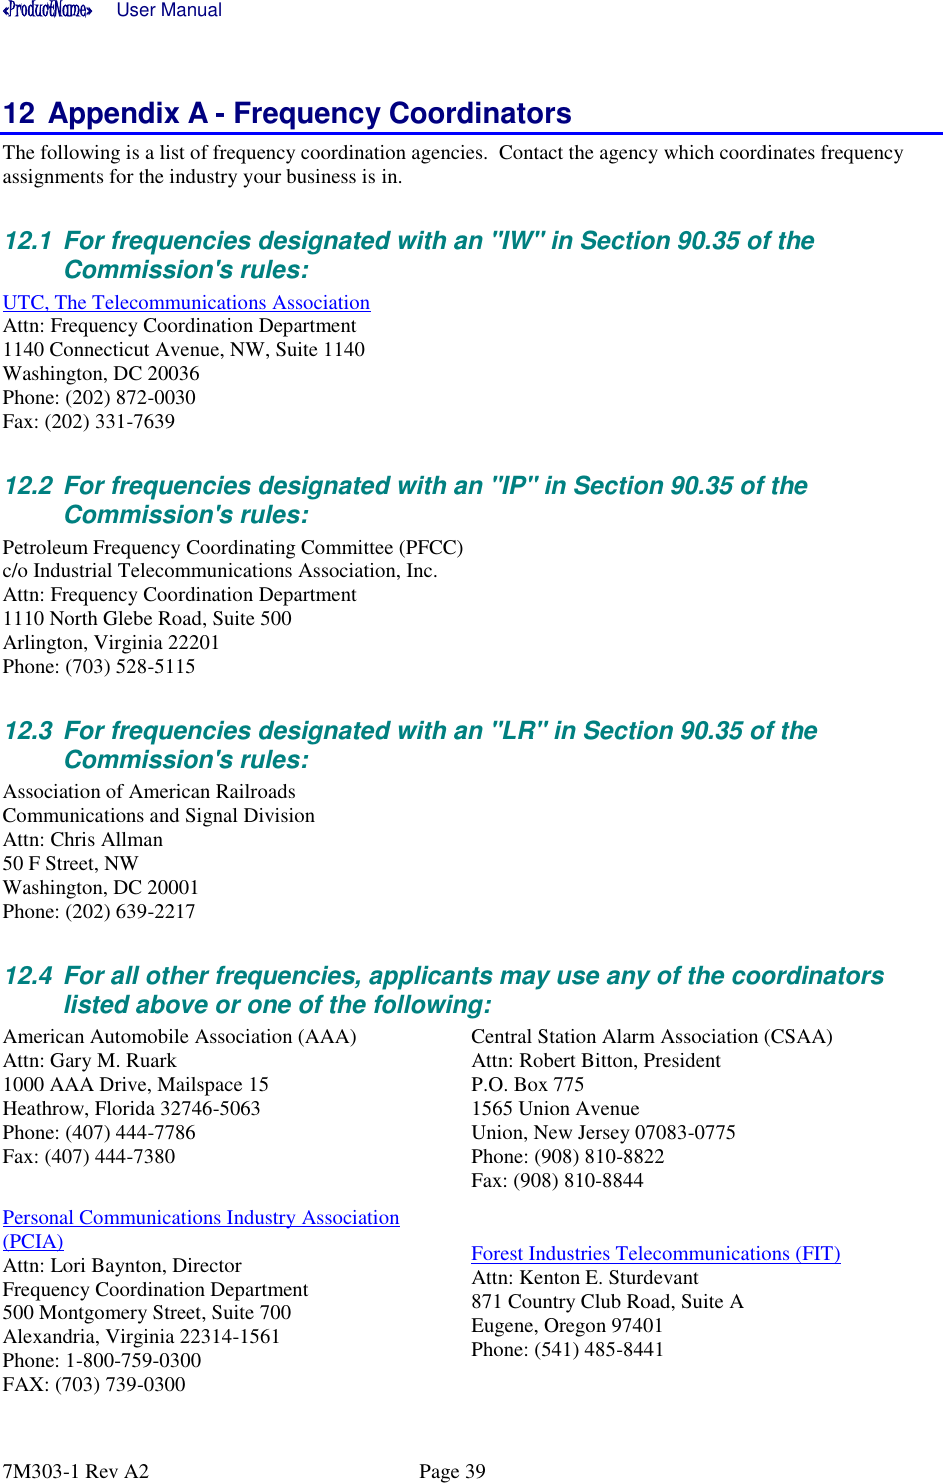 «ProductName»      User Manual      7M303-1 Rev A2  Page 39 12 Appendix A - Frequency Coordinators The following is a list of frequency coordination agencies.  Contact the agency which coordinates frequency assignments for the industry your business is in. 12.1  For frequencies designated with an &quot;IW&quot; in Section 90.35 of the Commission&apos;s rules:  UTC, The Telecommunications Association Attn: Frequency Coordination Department 1140 Connecticut Avenue, NW, Suite 1140 Washington, DC 20036 Phone: (202) 872-0030 Fax: (202) 331-7639 12.2  For frequencies designated with an &quot;IP&quot; in Section 90.35 of the Commission&apos;s rules:  Petroleum Frequency Coordinating Committee (PFCC) c/o Industrial Telecommunications Association, Inc. Attn: Frequency Coordination Department 1110 North Glebe Road, Suite 500 Arlington, Virginia 22201 Phone: (703) 528-5115 12.3  For frequencies designated with an &quot;LR&quot; in Section 90.35 of the Commission&apos;s rules:  Association of American Railroads Communications and Signal Division Attn: Chris Allman 50 F Street, NW Washington, DC 20001 Phone: (202) 639-2217 12.4  For all other frequencies, applicants may use any of the coordinators listed above or one of the following:  American Automobile Association (AAA) Attn: Gary M. Ruark 1000 AAA Drive, Mailspace 15 Heathrow, Florida 32746-5063 Phone: (407) 444-7786 Fax: (407) 444-7380  Personal Communications Industry Association (PCIA) Attn: Lori Baynton, Director Frequency Coordination Department 500 Montgomery Street, Suite 700 Alexandria, Virginia 22314-1561 Phone: 1-800-759-0300 FAX: (703) 739-0300  Central Station Alarm Association (CSAA) Attn: Robert Bitton, President P.O. Box 775 1565 Union Avenue Union, New Jersey 07083-0775 Phone: (908) 810-8822 Fax: (908) 810-8844  Forest Industries Telecommunications (FIT) Attn: Kenton E. Sturdevant 871 Country Club Road, Suite A Eugene, Oregon 97401 Phone: (541) 485-8441 